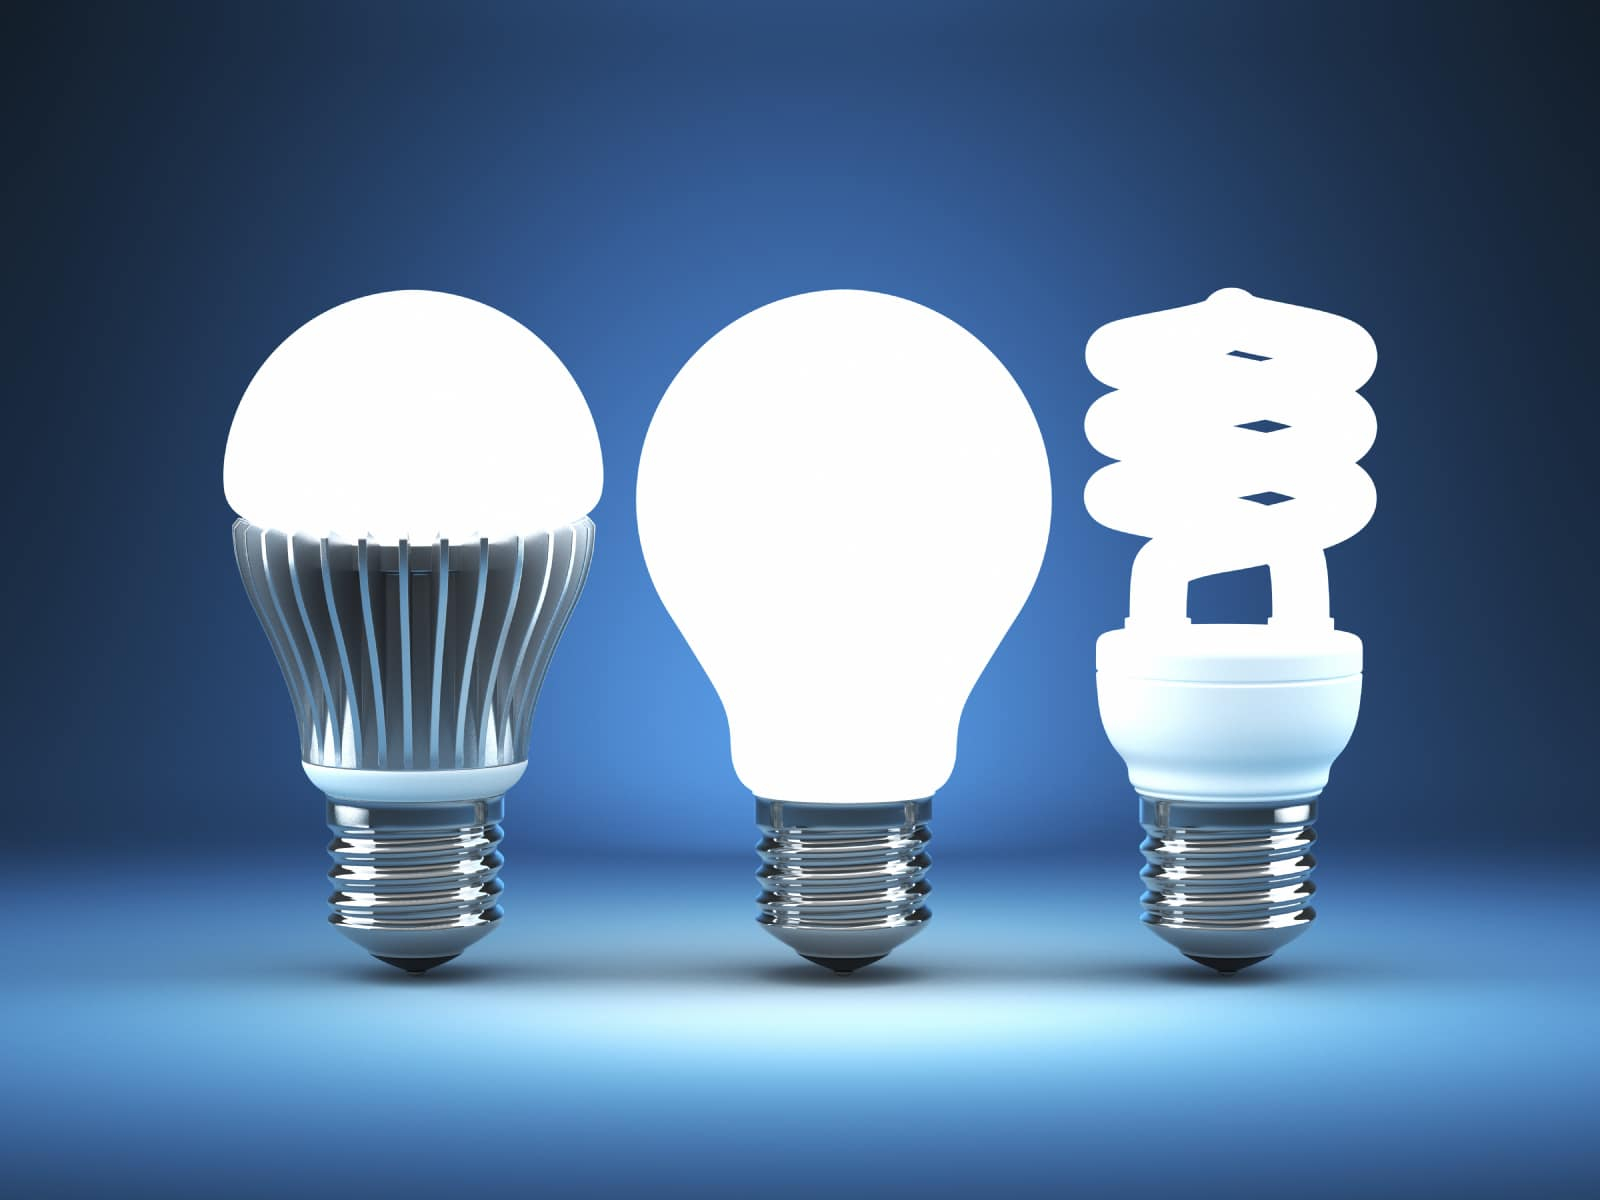 Using Energy Saving Light Bulbs Pros Cons And Facts in dimensions 1600 X 1200